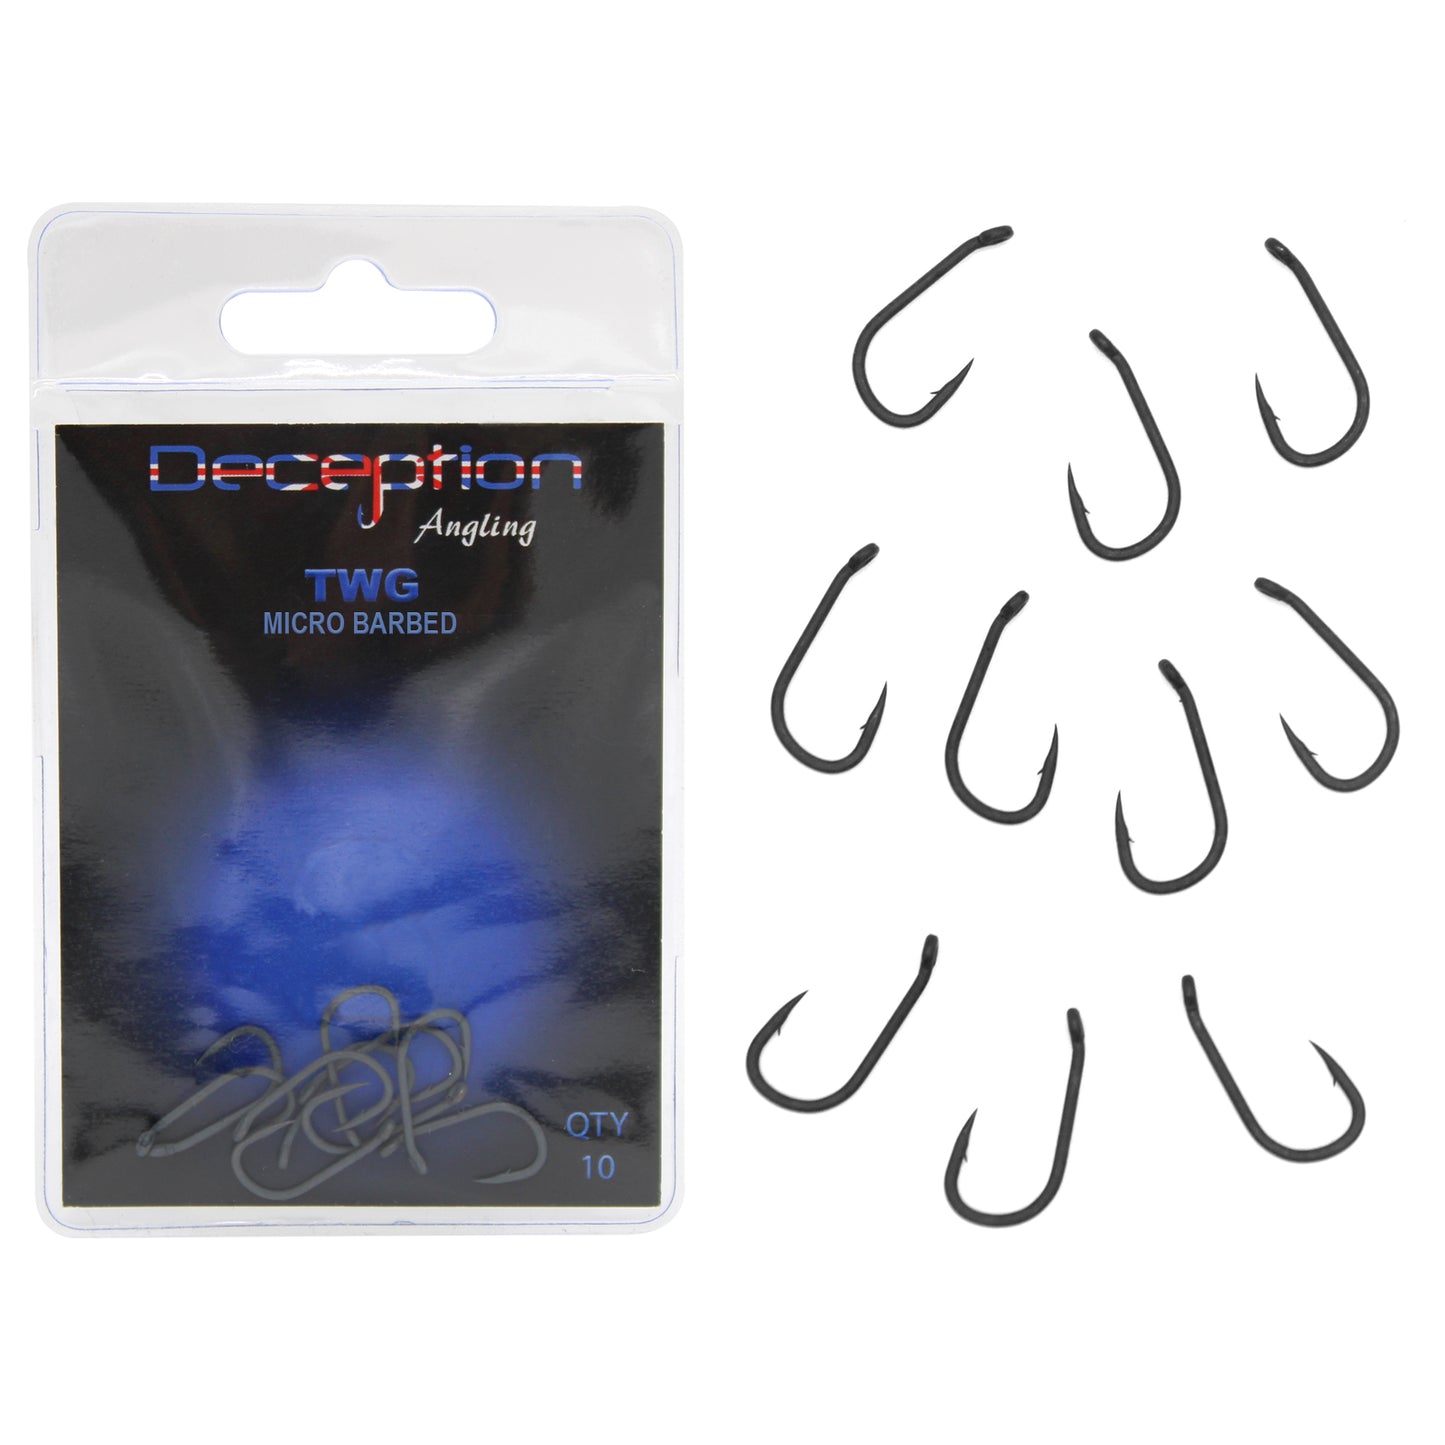 Deception Angling TWG Micro Barbed Fishing Hooks Pack of 10